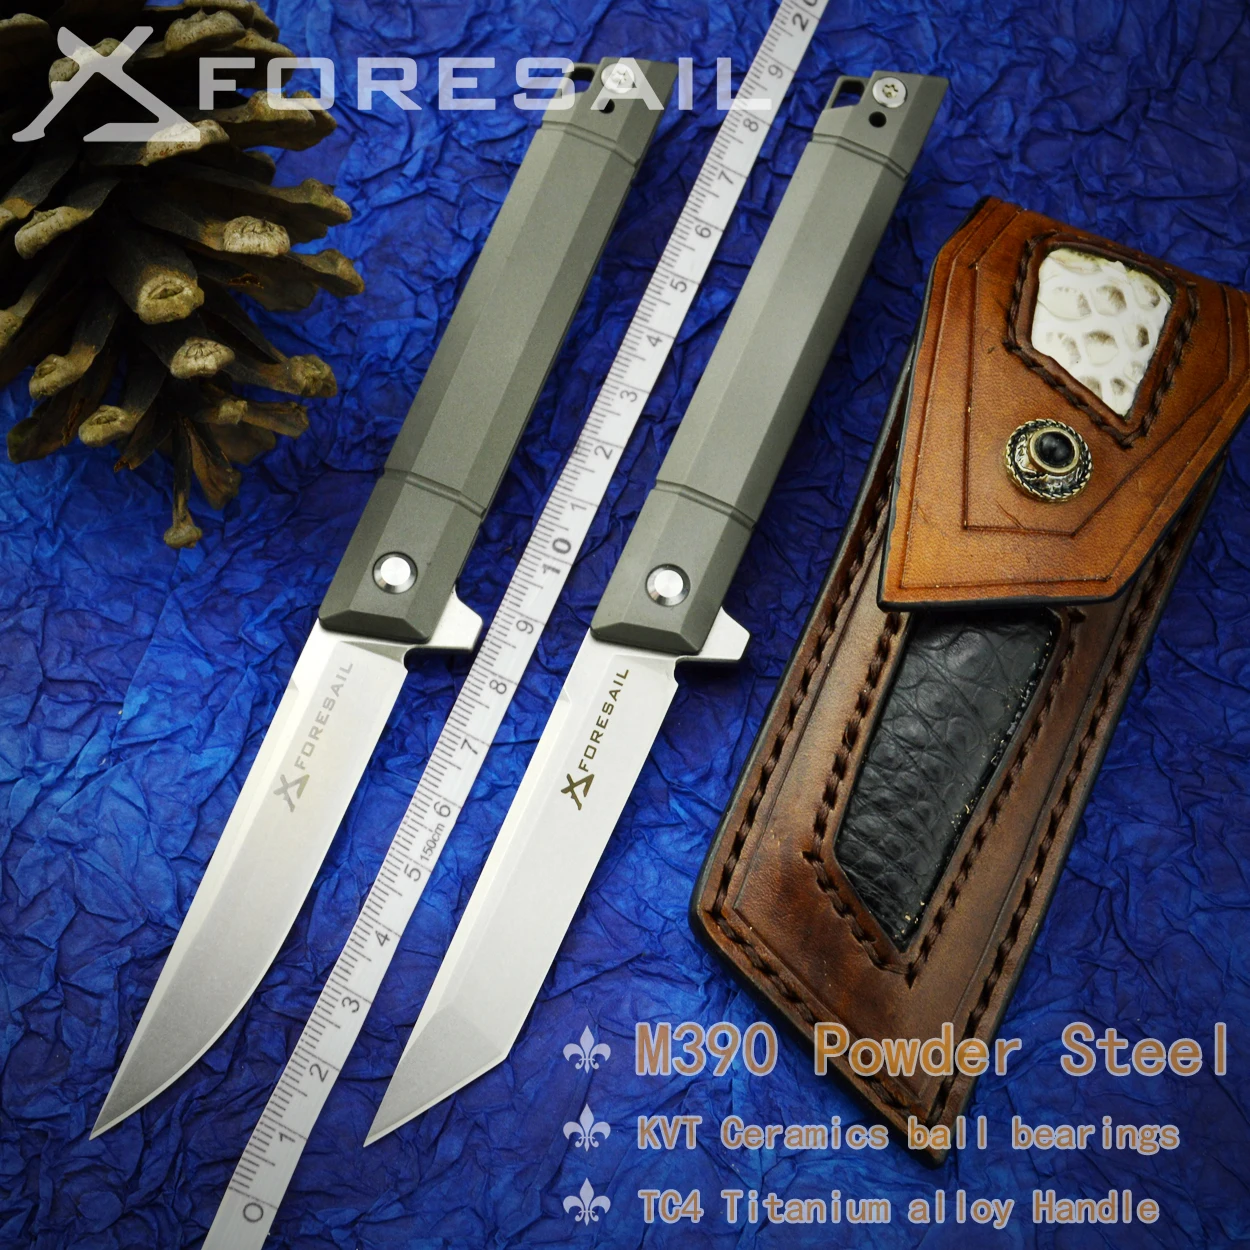 Foresail-m390 powder steel folding knife bag knife with titanium alloy handle portable bearing knife outdoor EDC tool